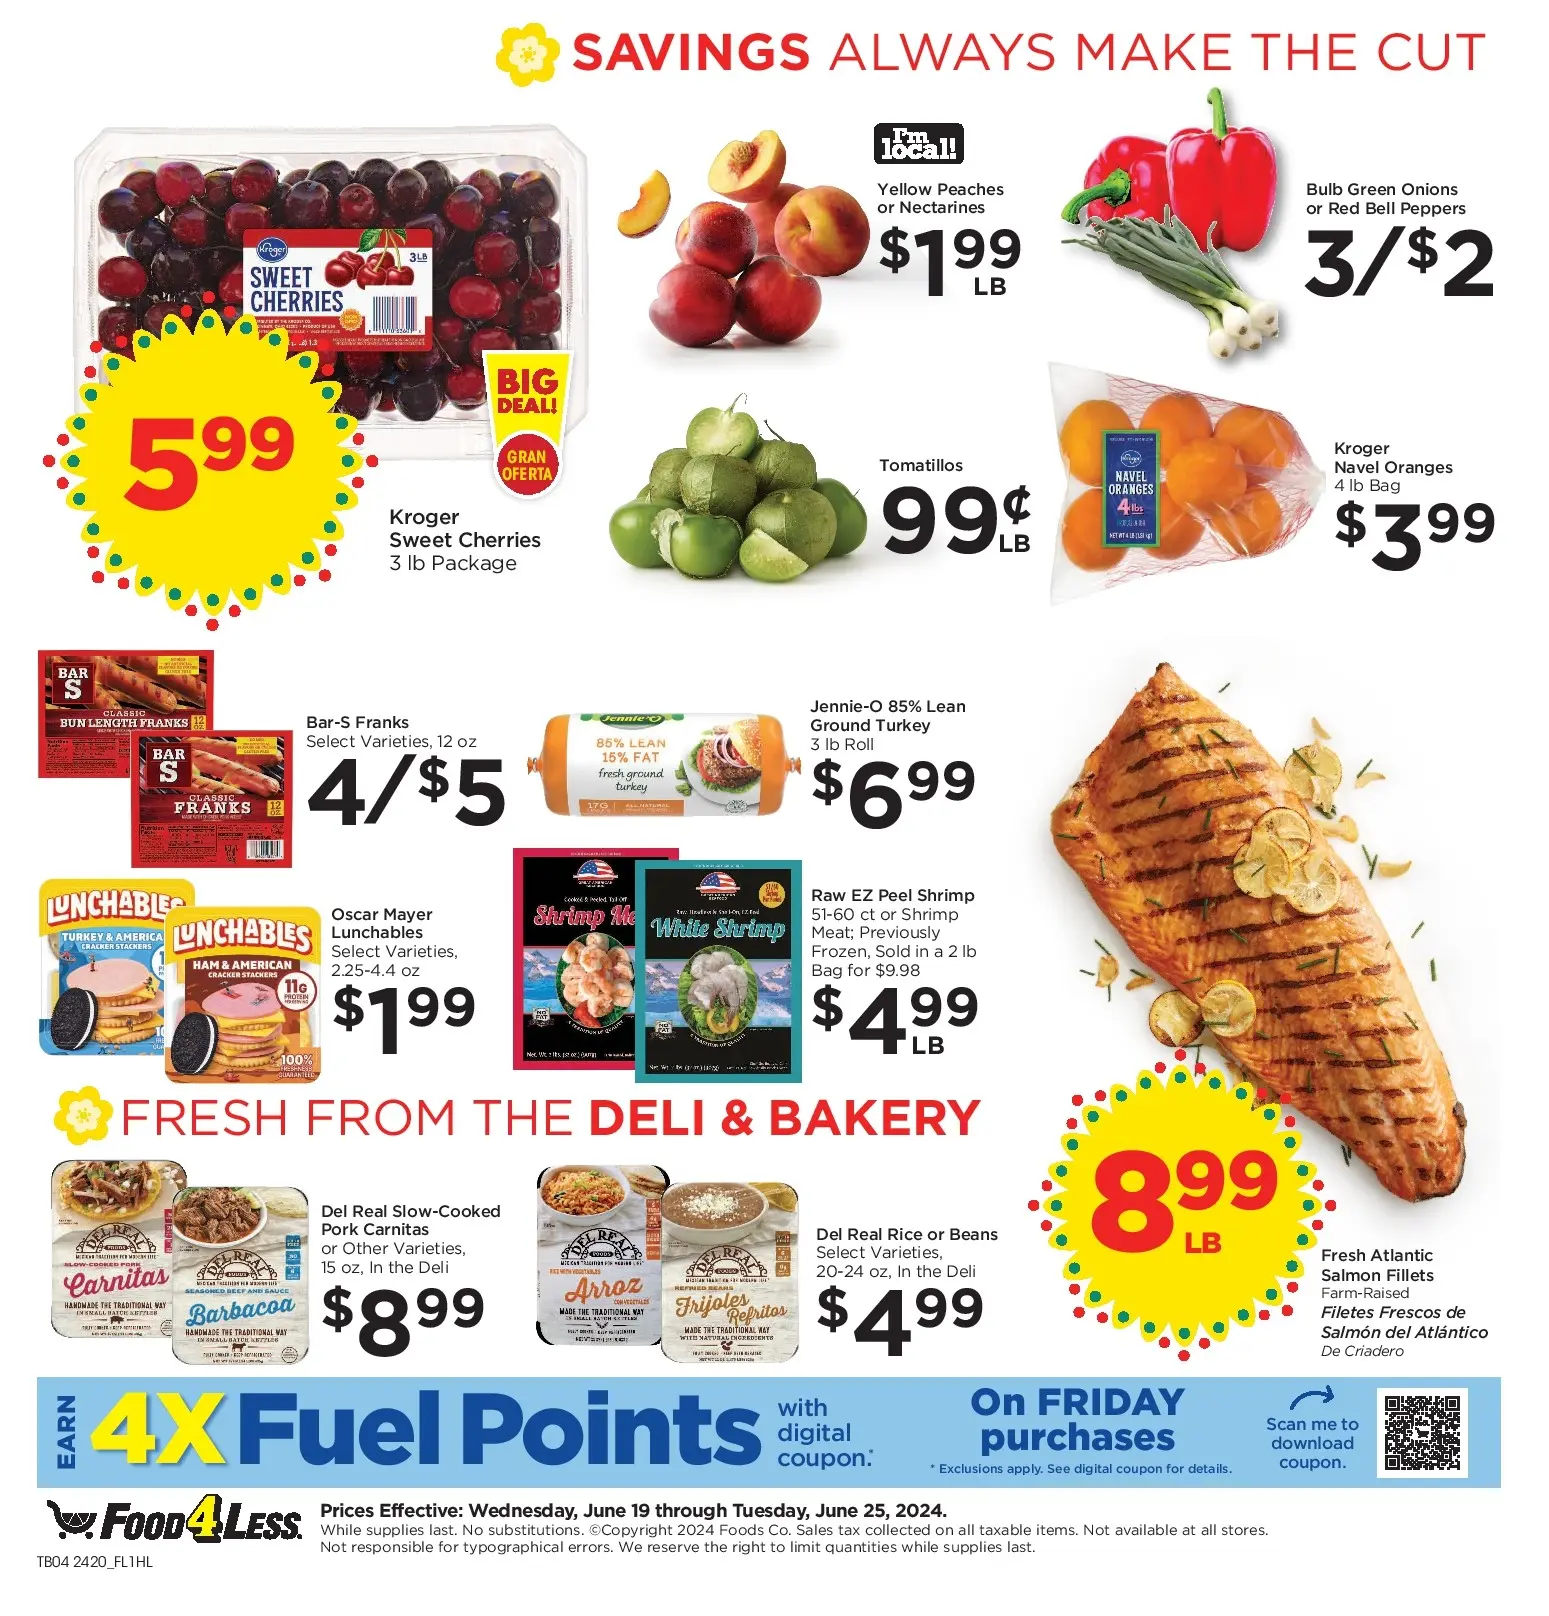 Food 4 Less July 2024 Weekly Sales, Deals, Discounts and Digital Coupons.